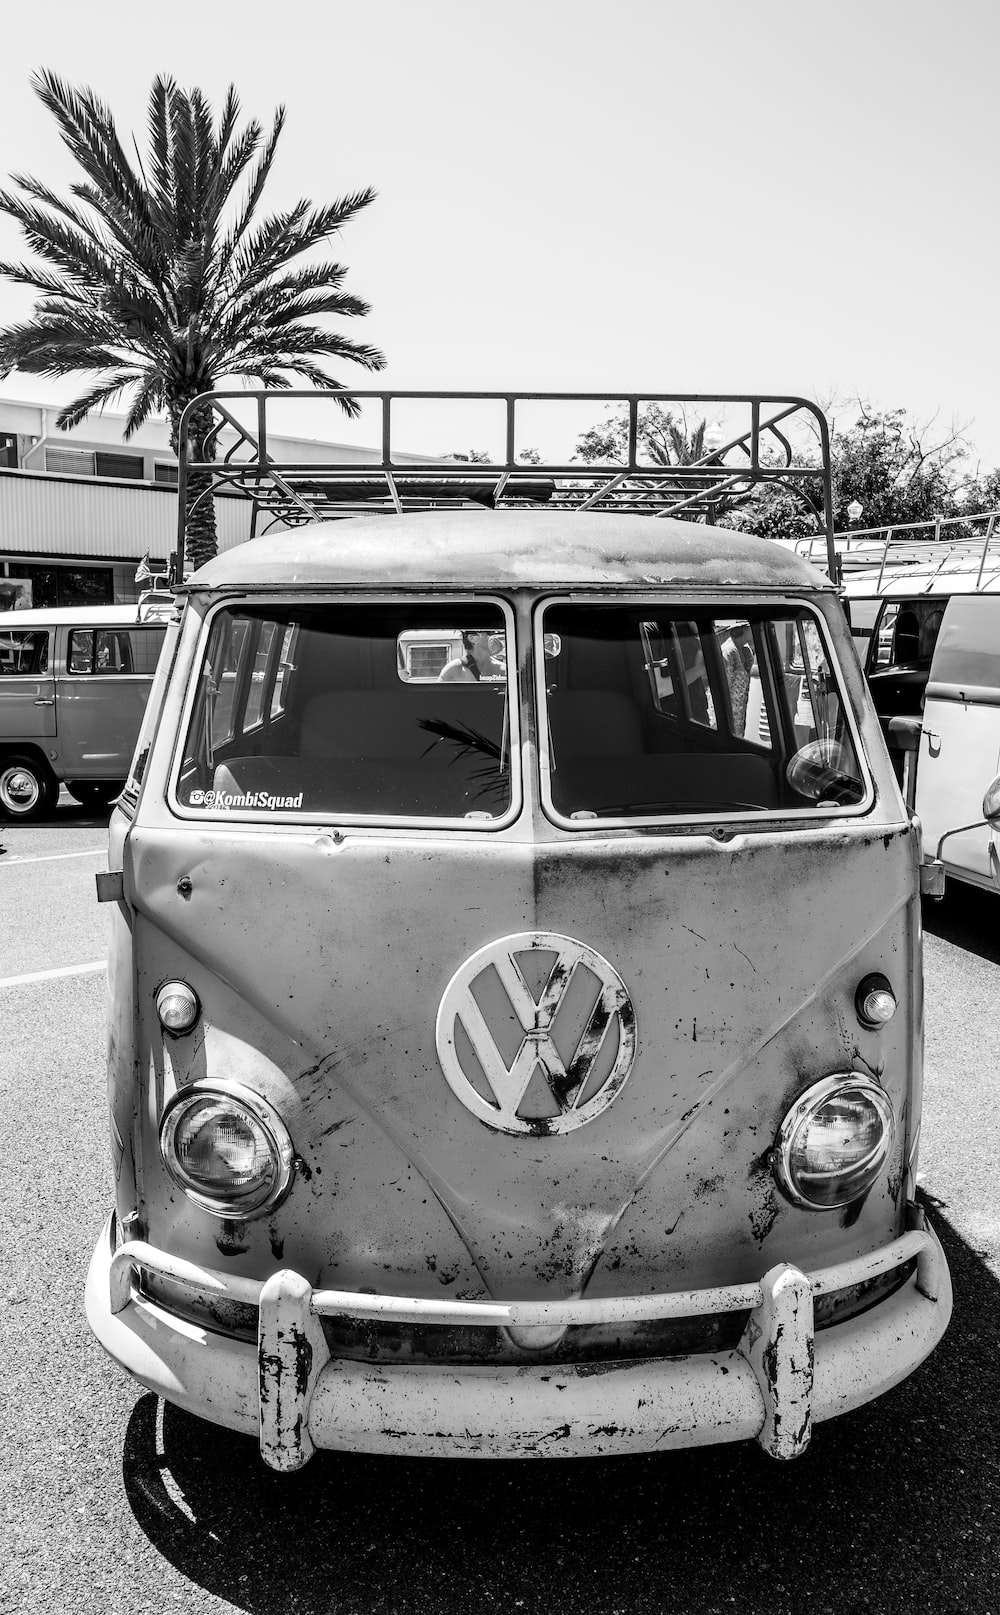 Vw Bus Wallpapers